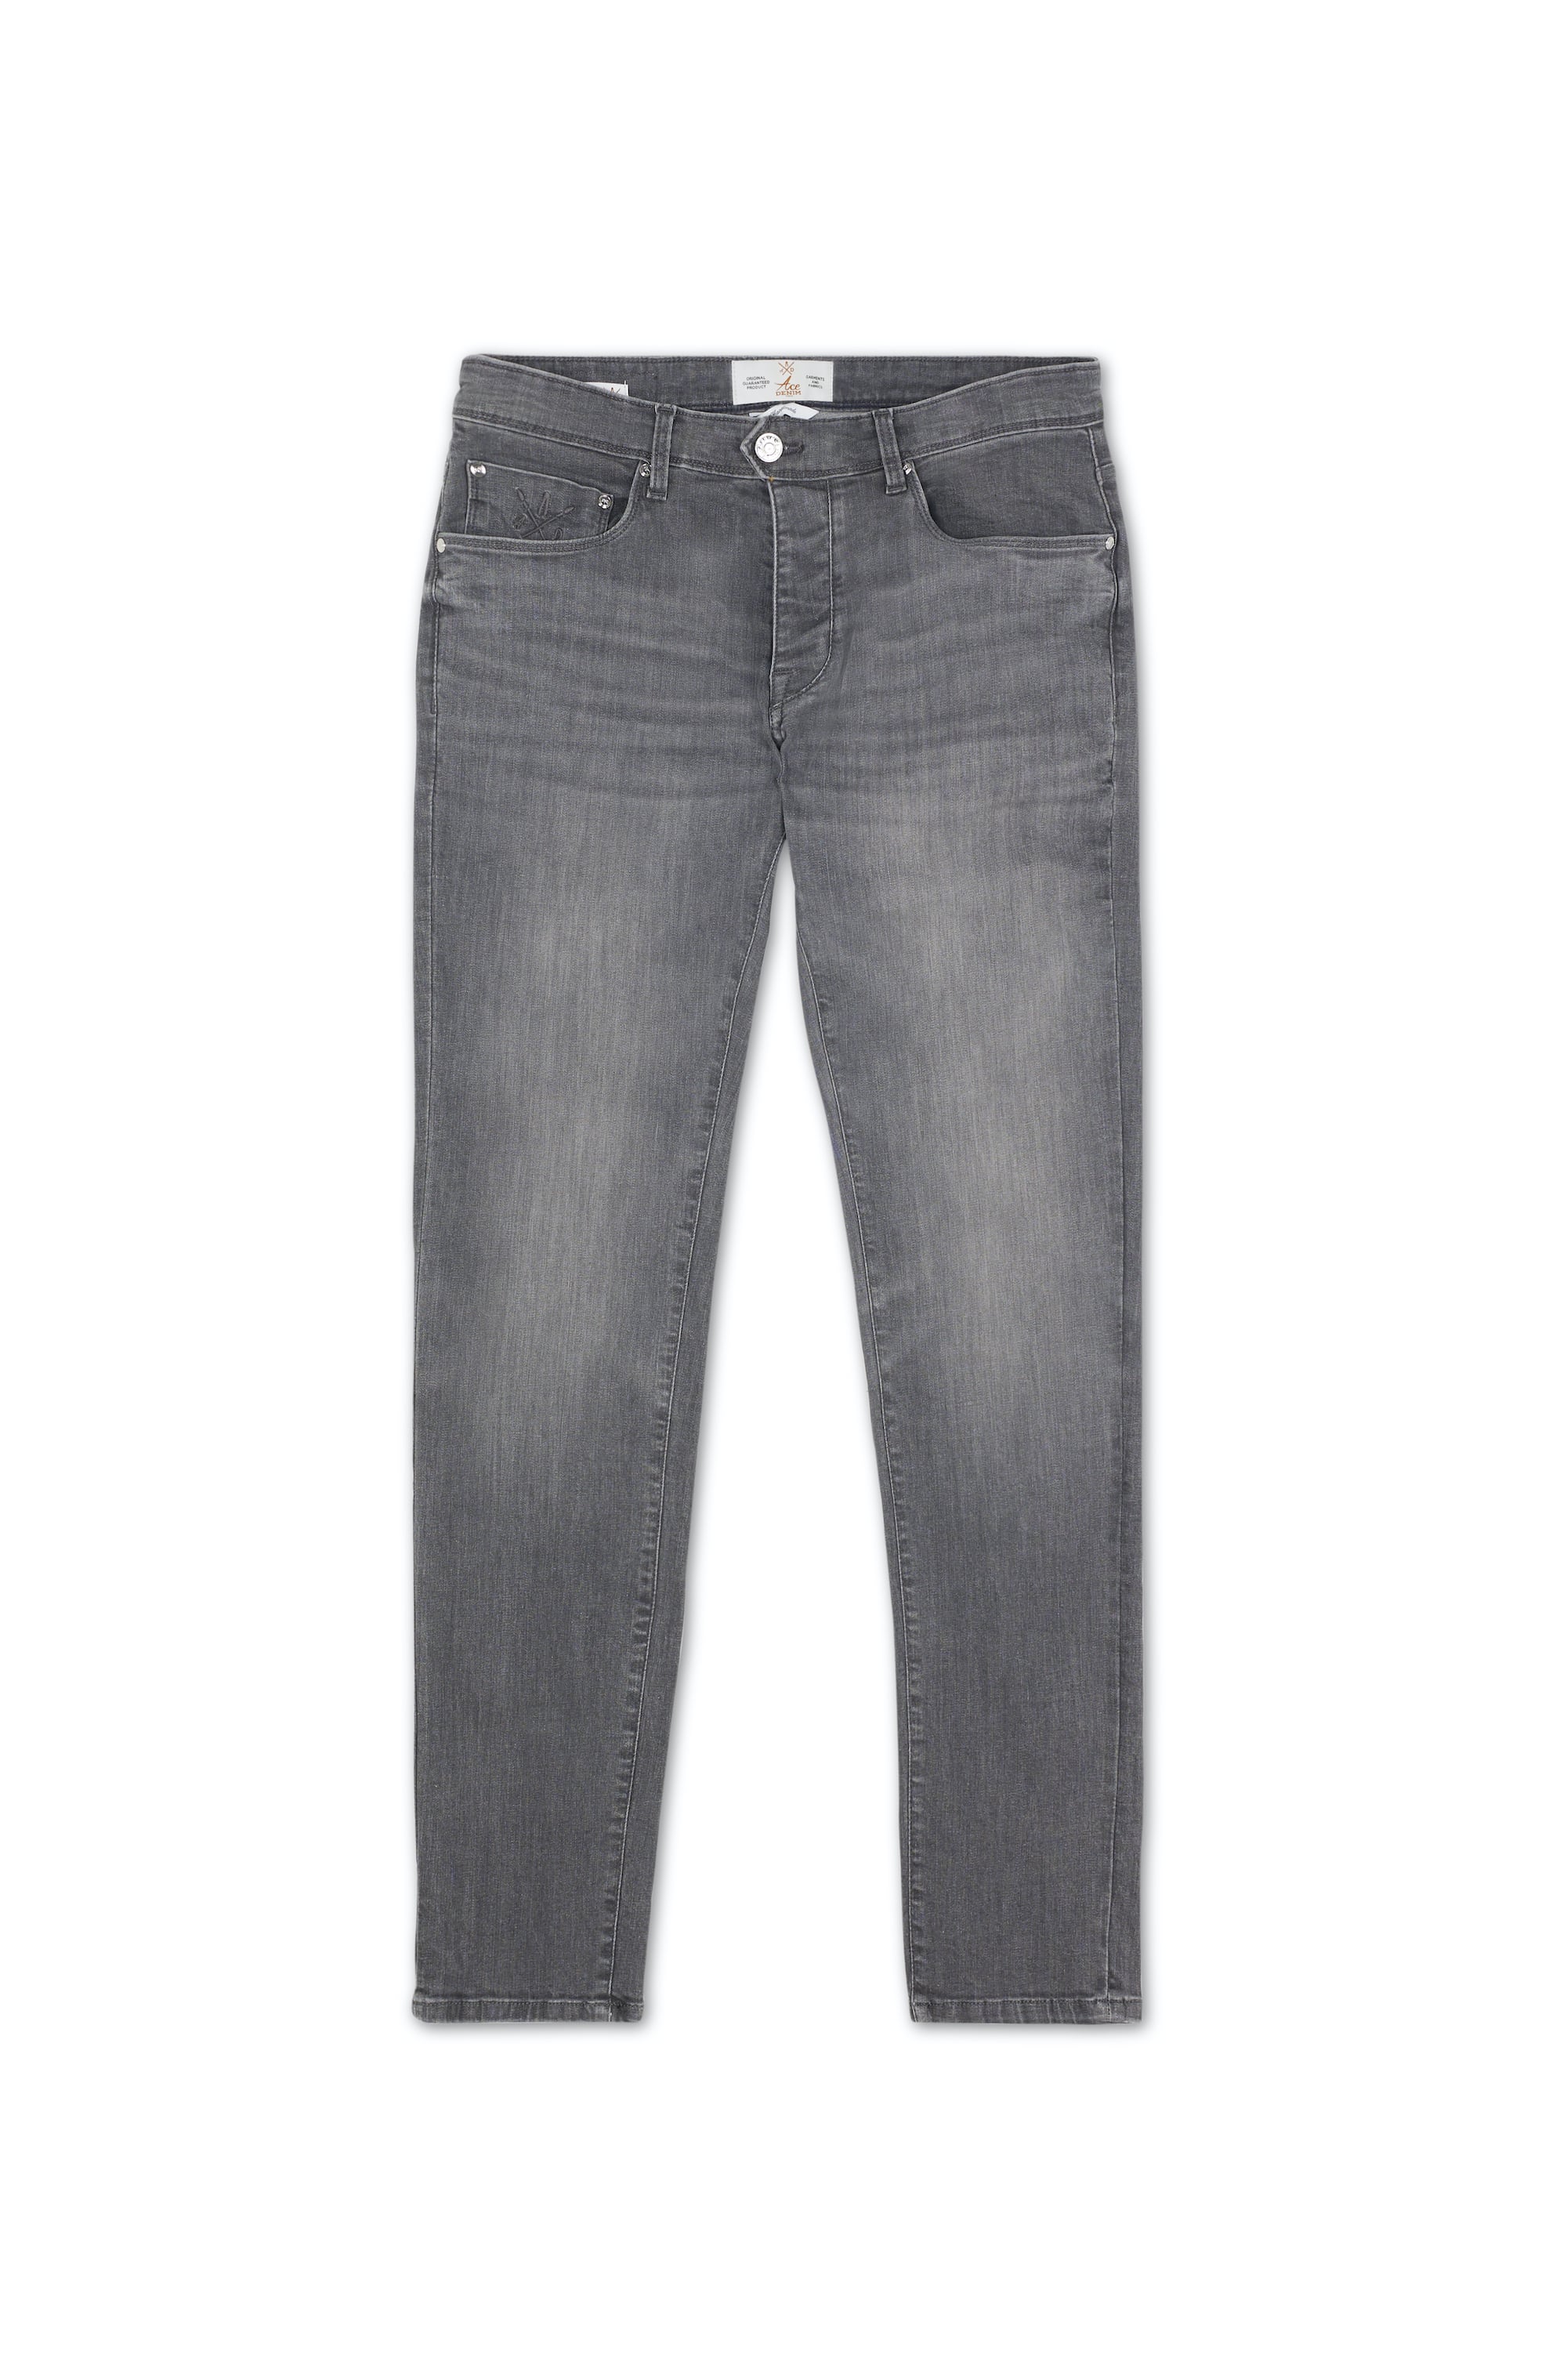 jeans homme gris coupe slim stretch